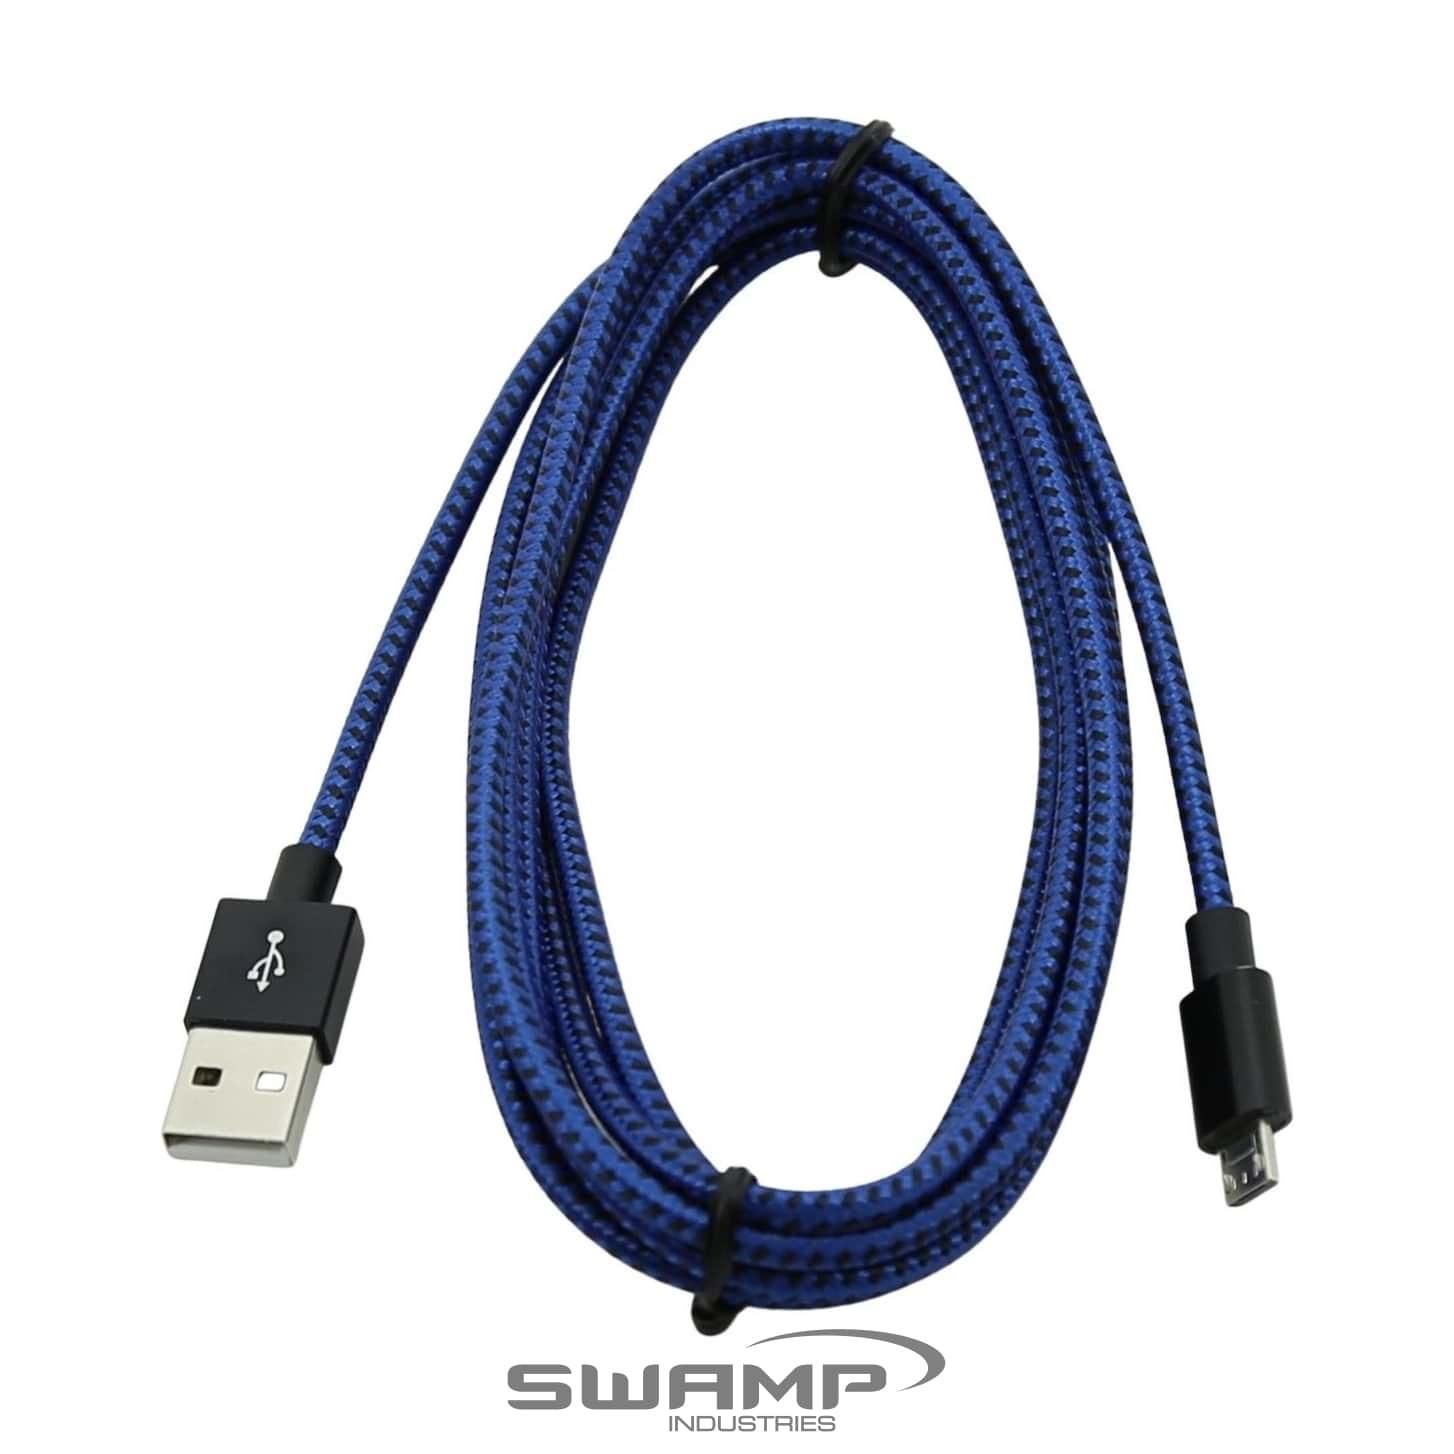 UGREEN Premium Micro USB to USB 2.0 Type A Cable with Braided Jacket - BLUE - 1m